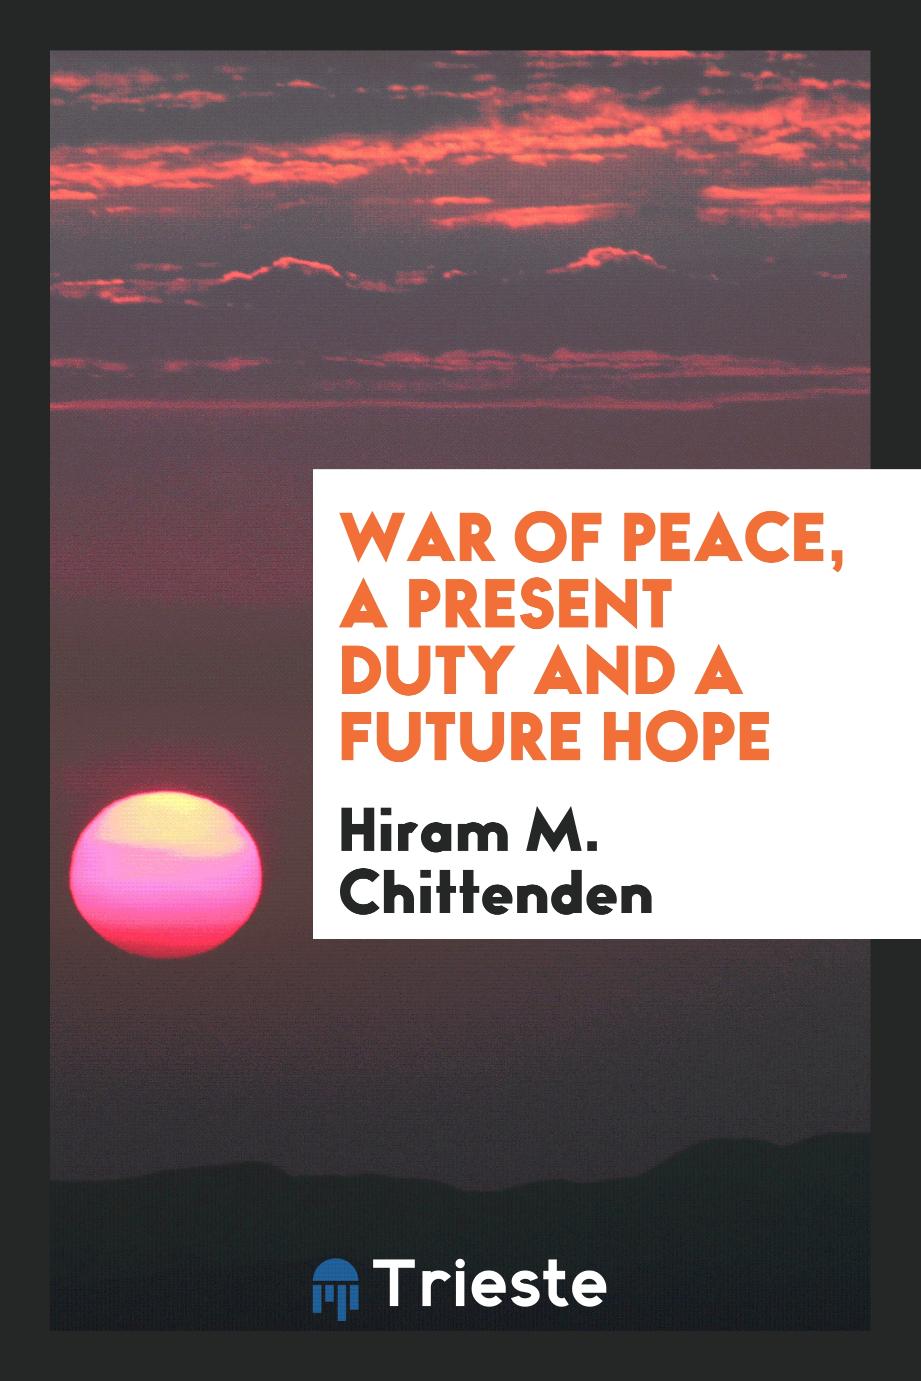 War of peace, a present duty and a future hope